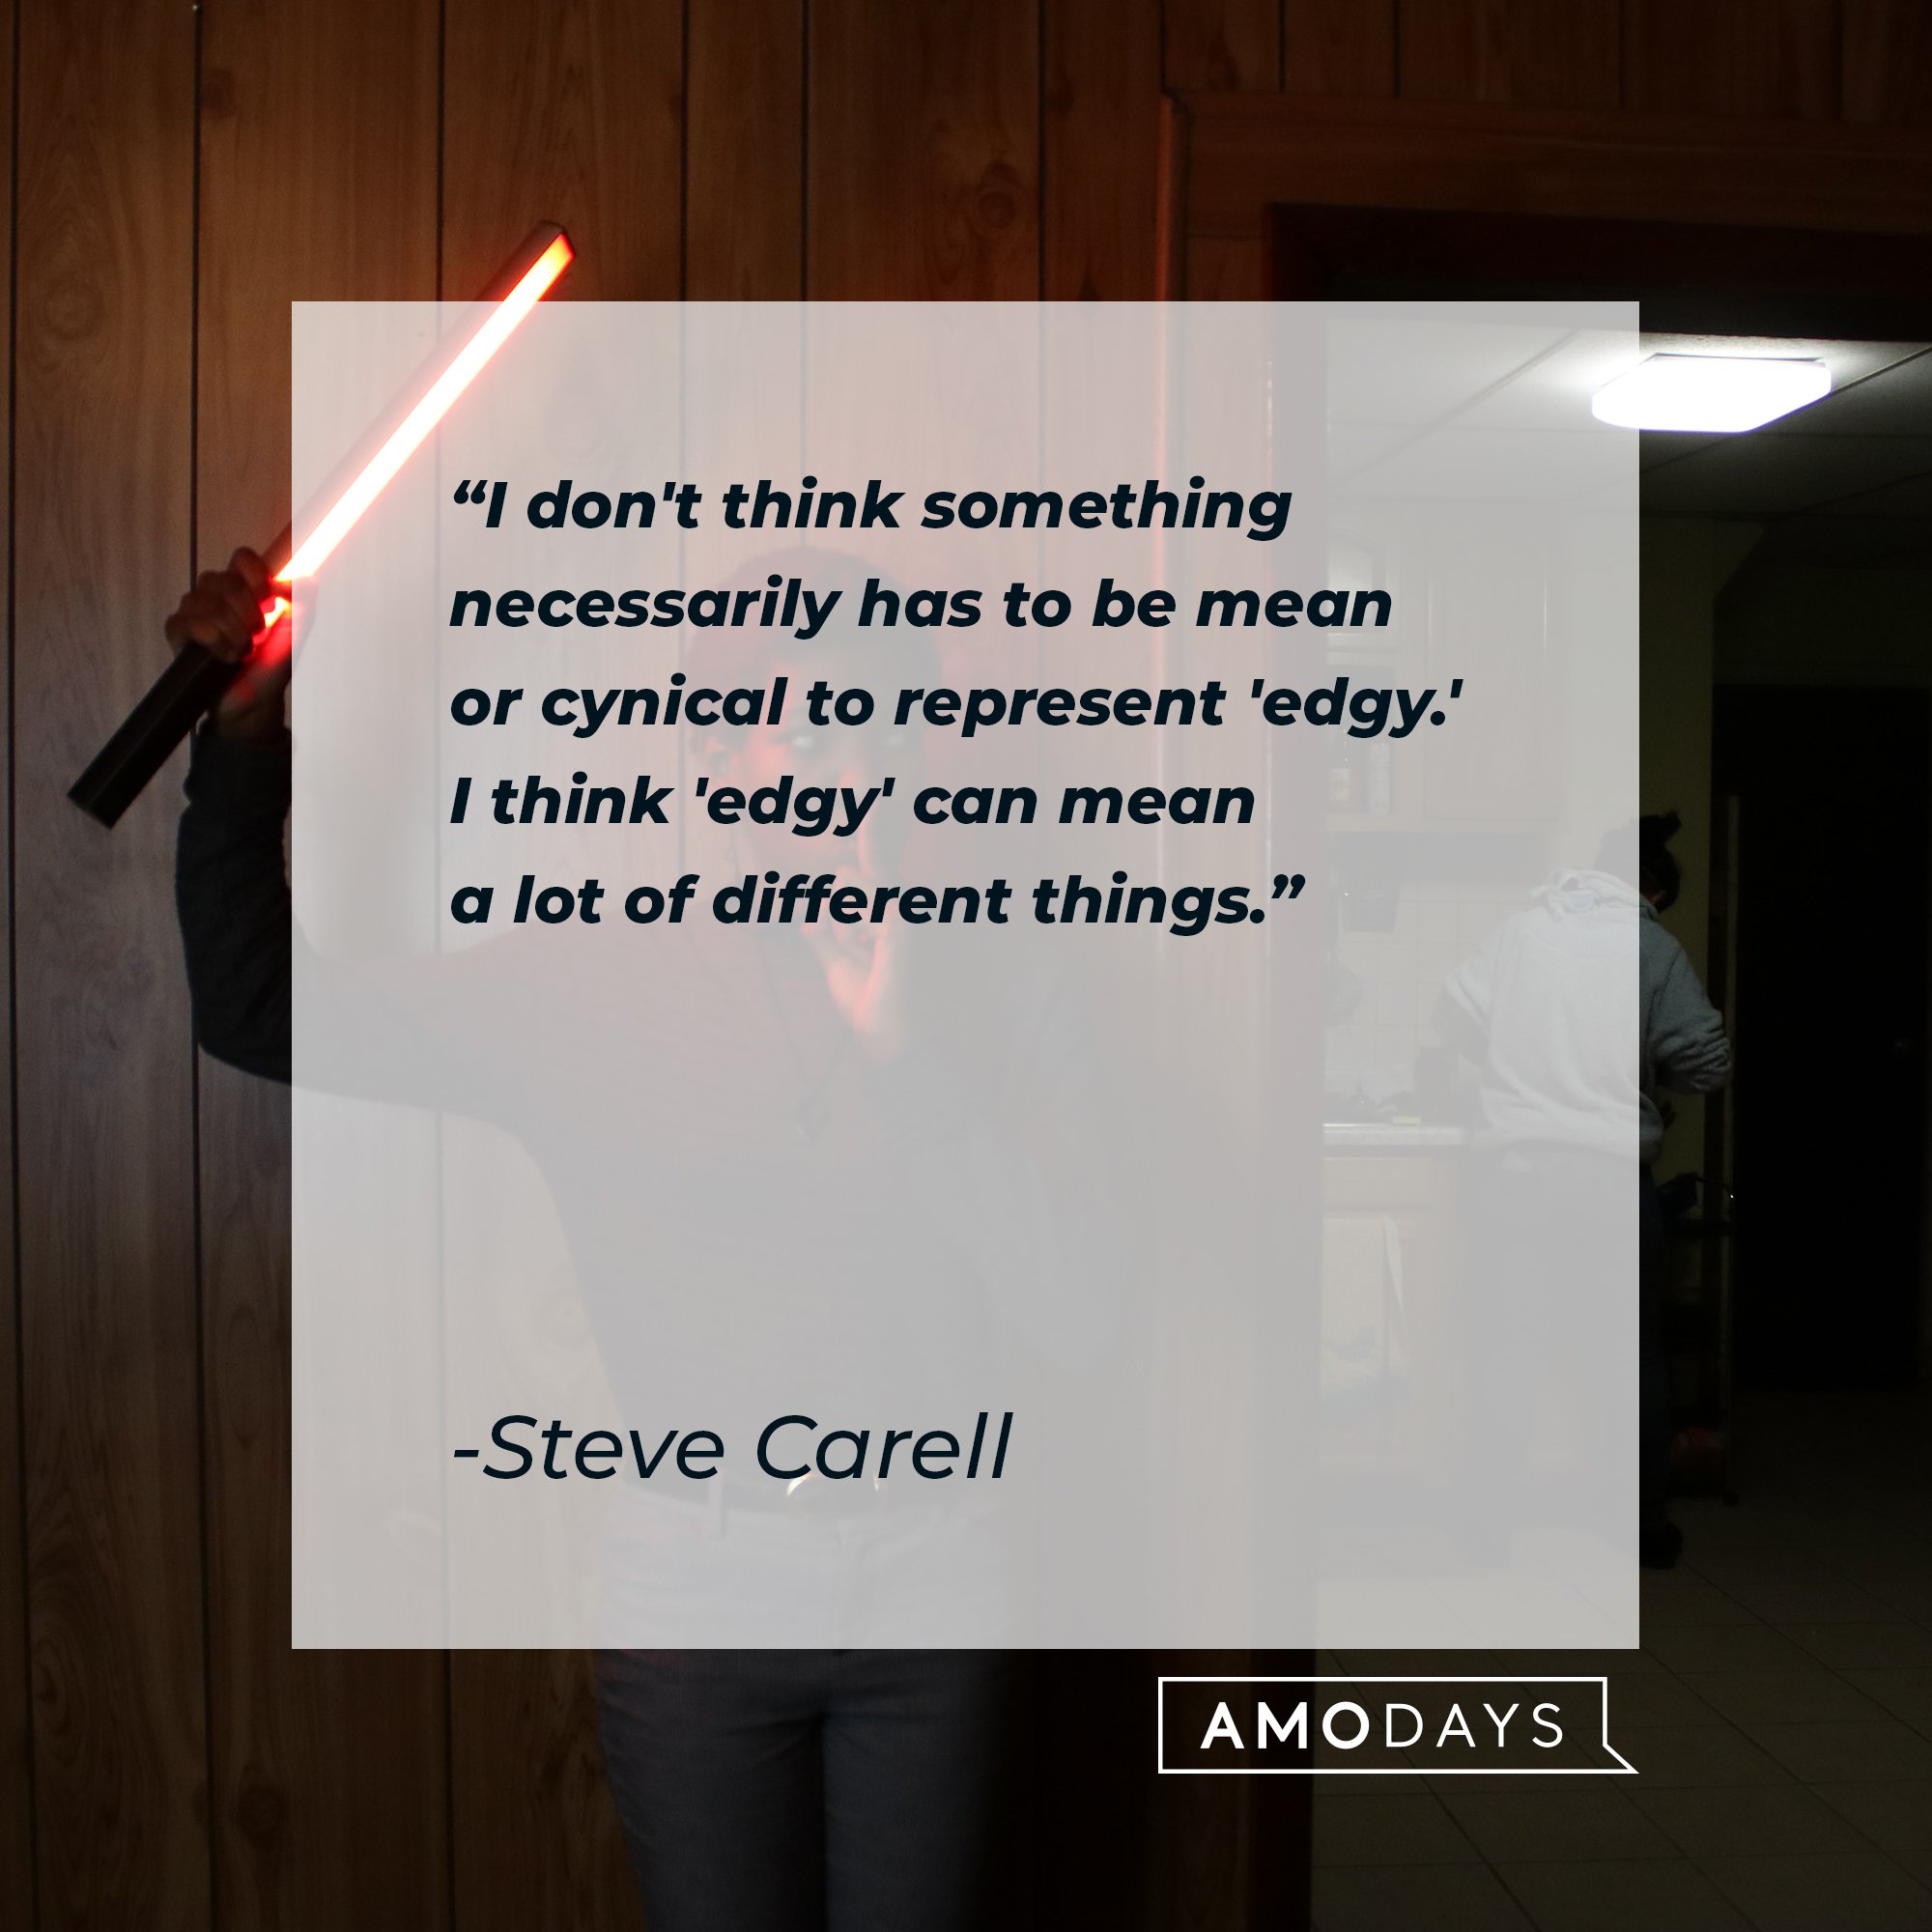 Steve Carell’s quote: "I don't think something necessarily has to be mean or cynical to represent 'edgy.' I think 'edgy' can mean a lot of different things." | Image: AmoDays 